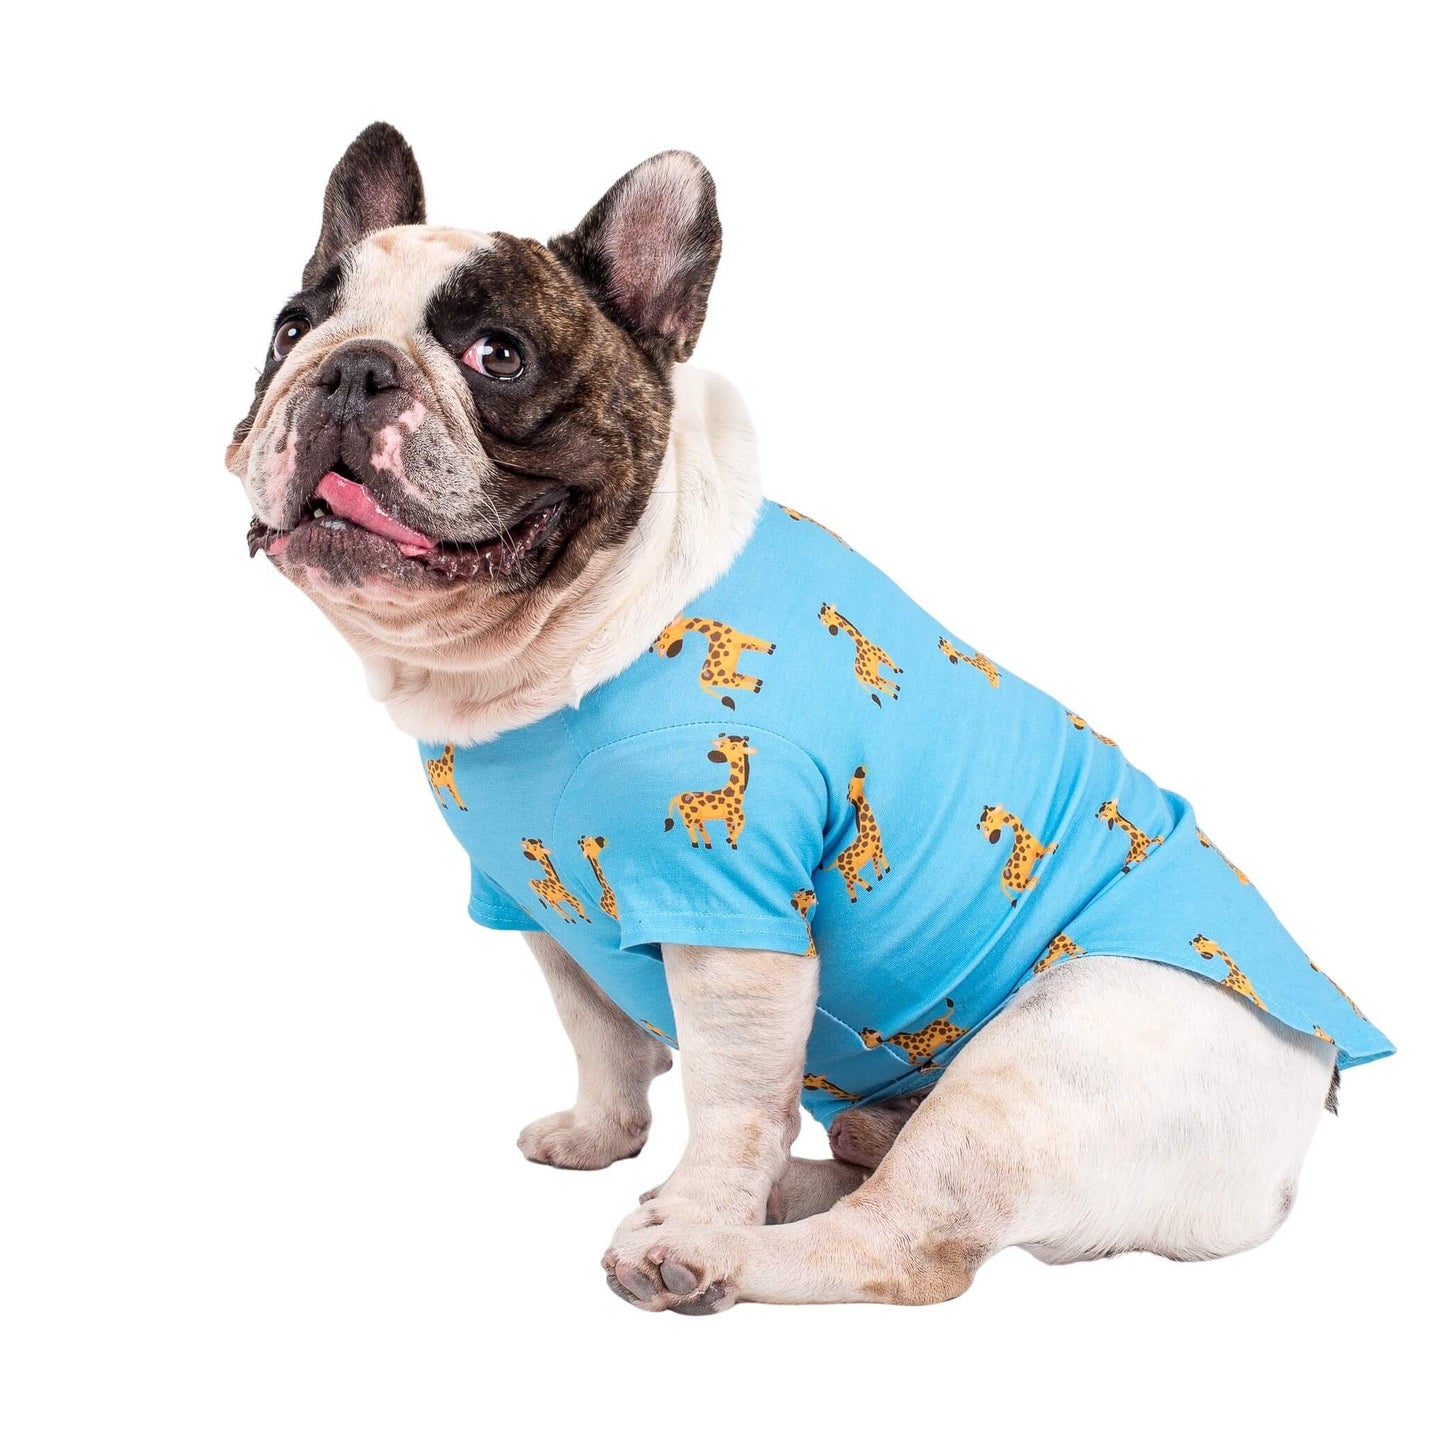 Chester the French Bulldog wearing Gerald the Giraffe dog pyjamas made by Vibrant Hound. The dog pyjamas are blue, with girrafes printed on them.